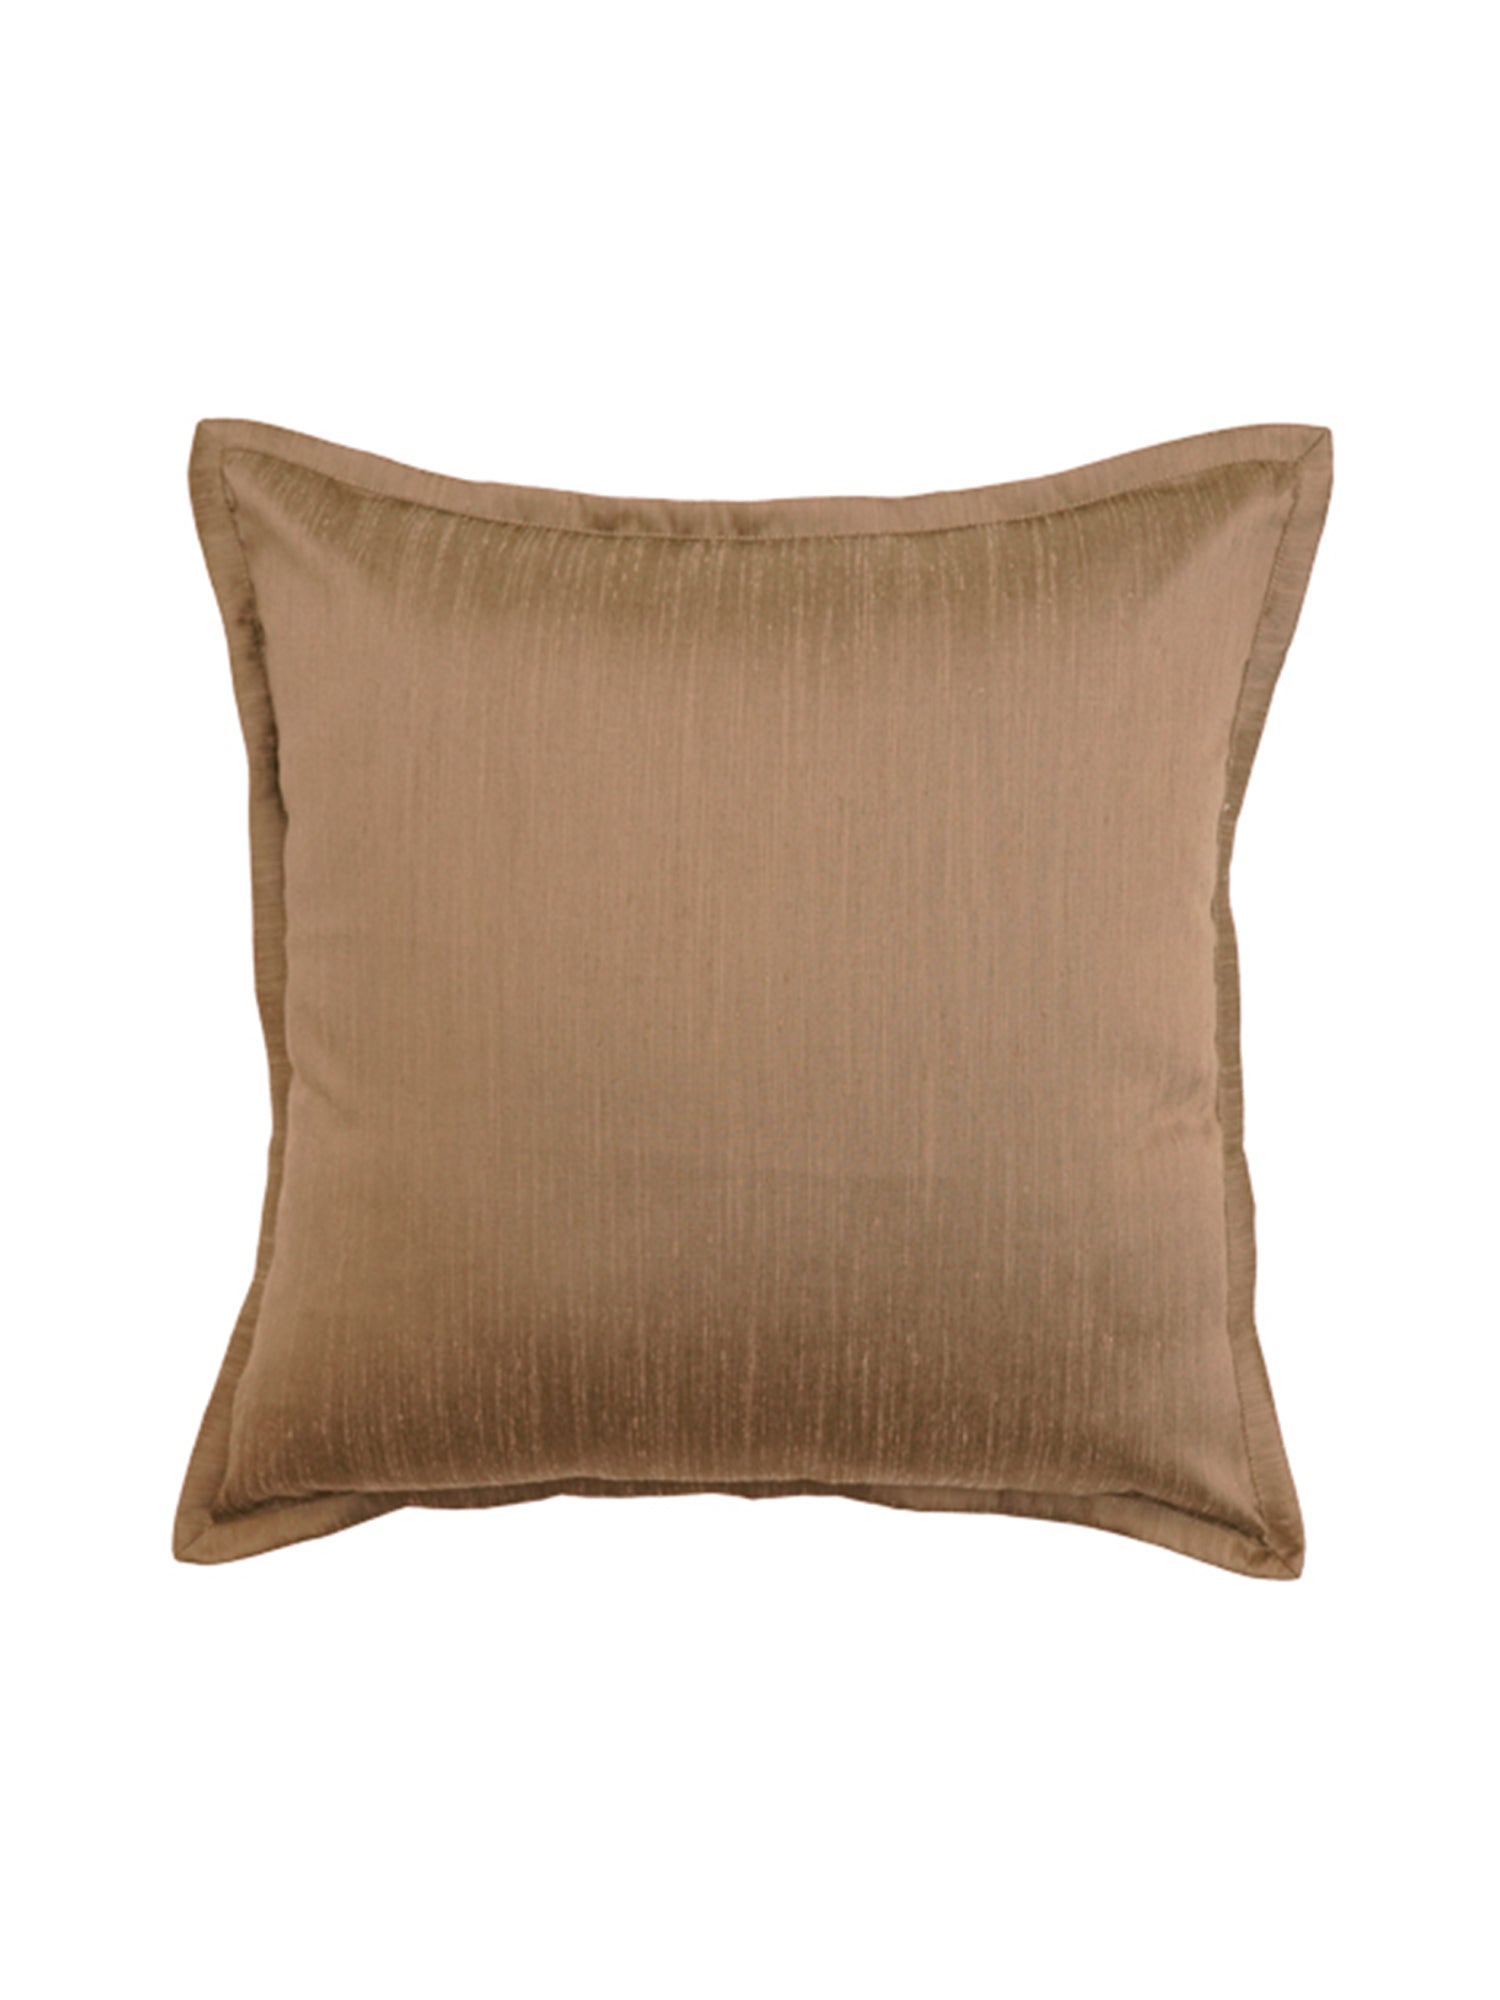 Cushion Cover Solid 100% Polyester FlangeBrown 16"X16"